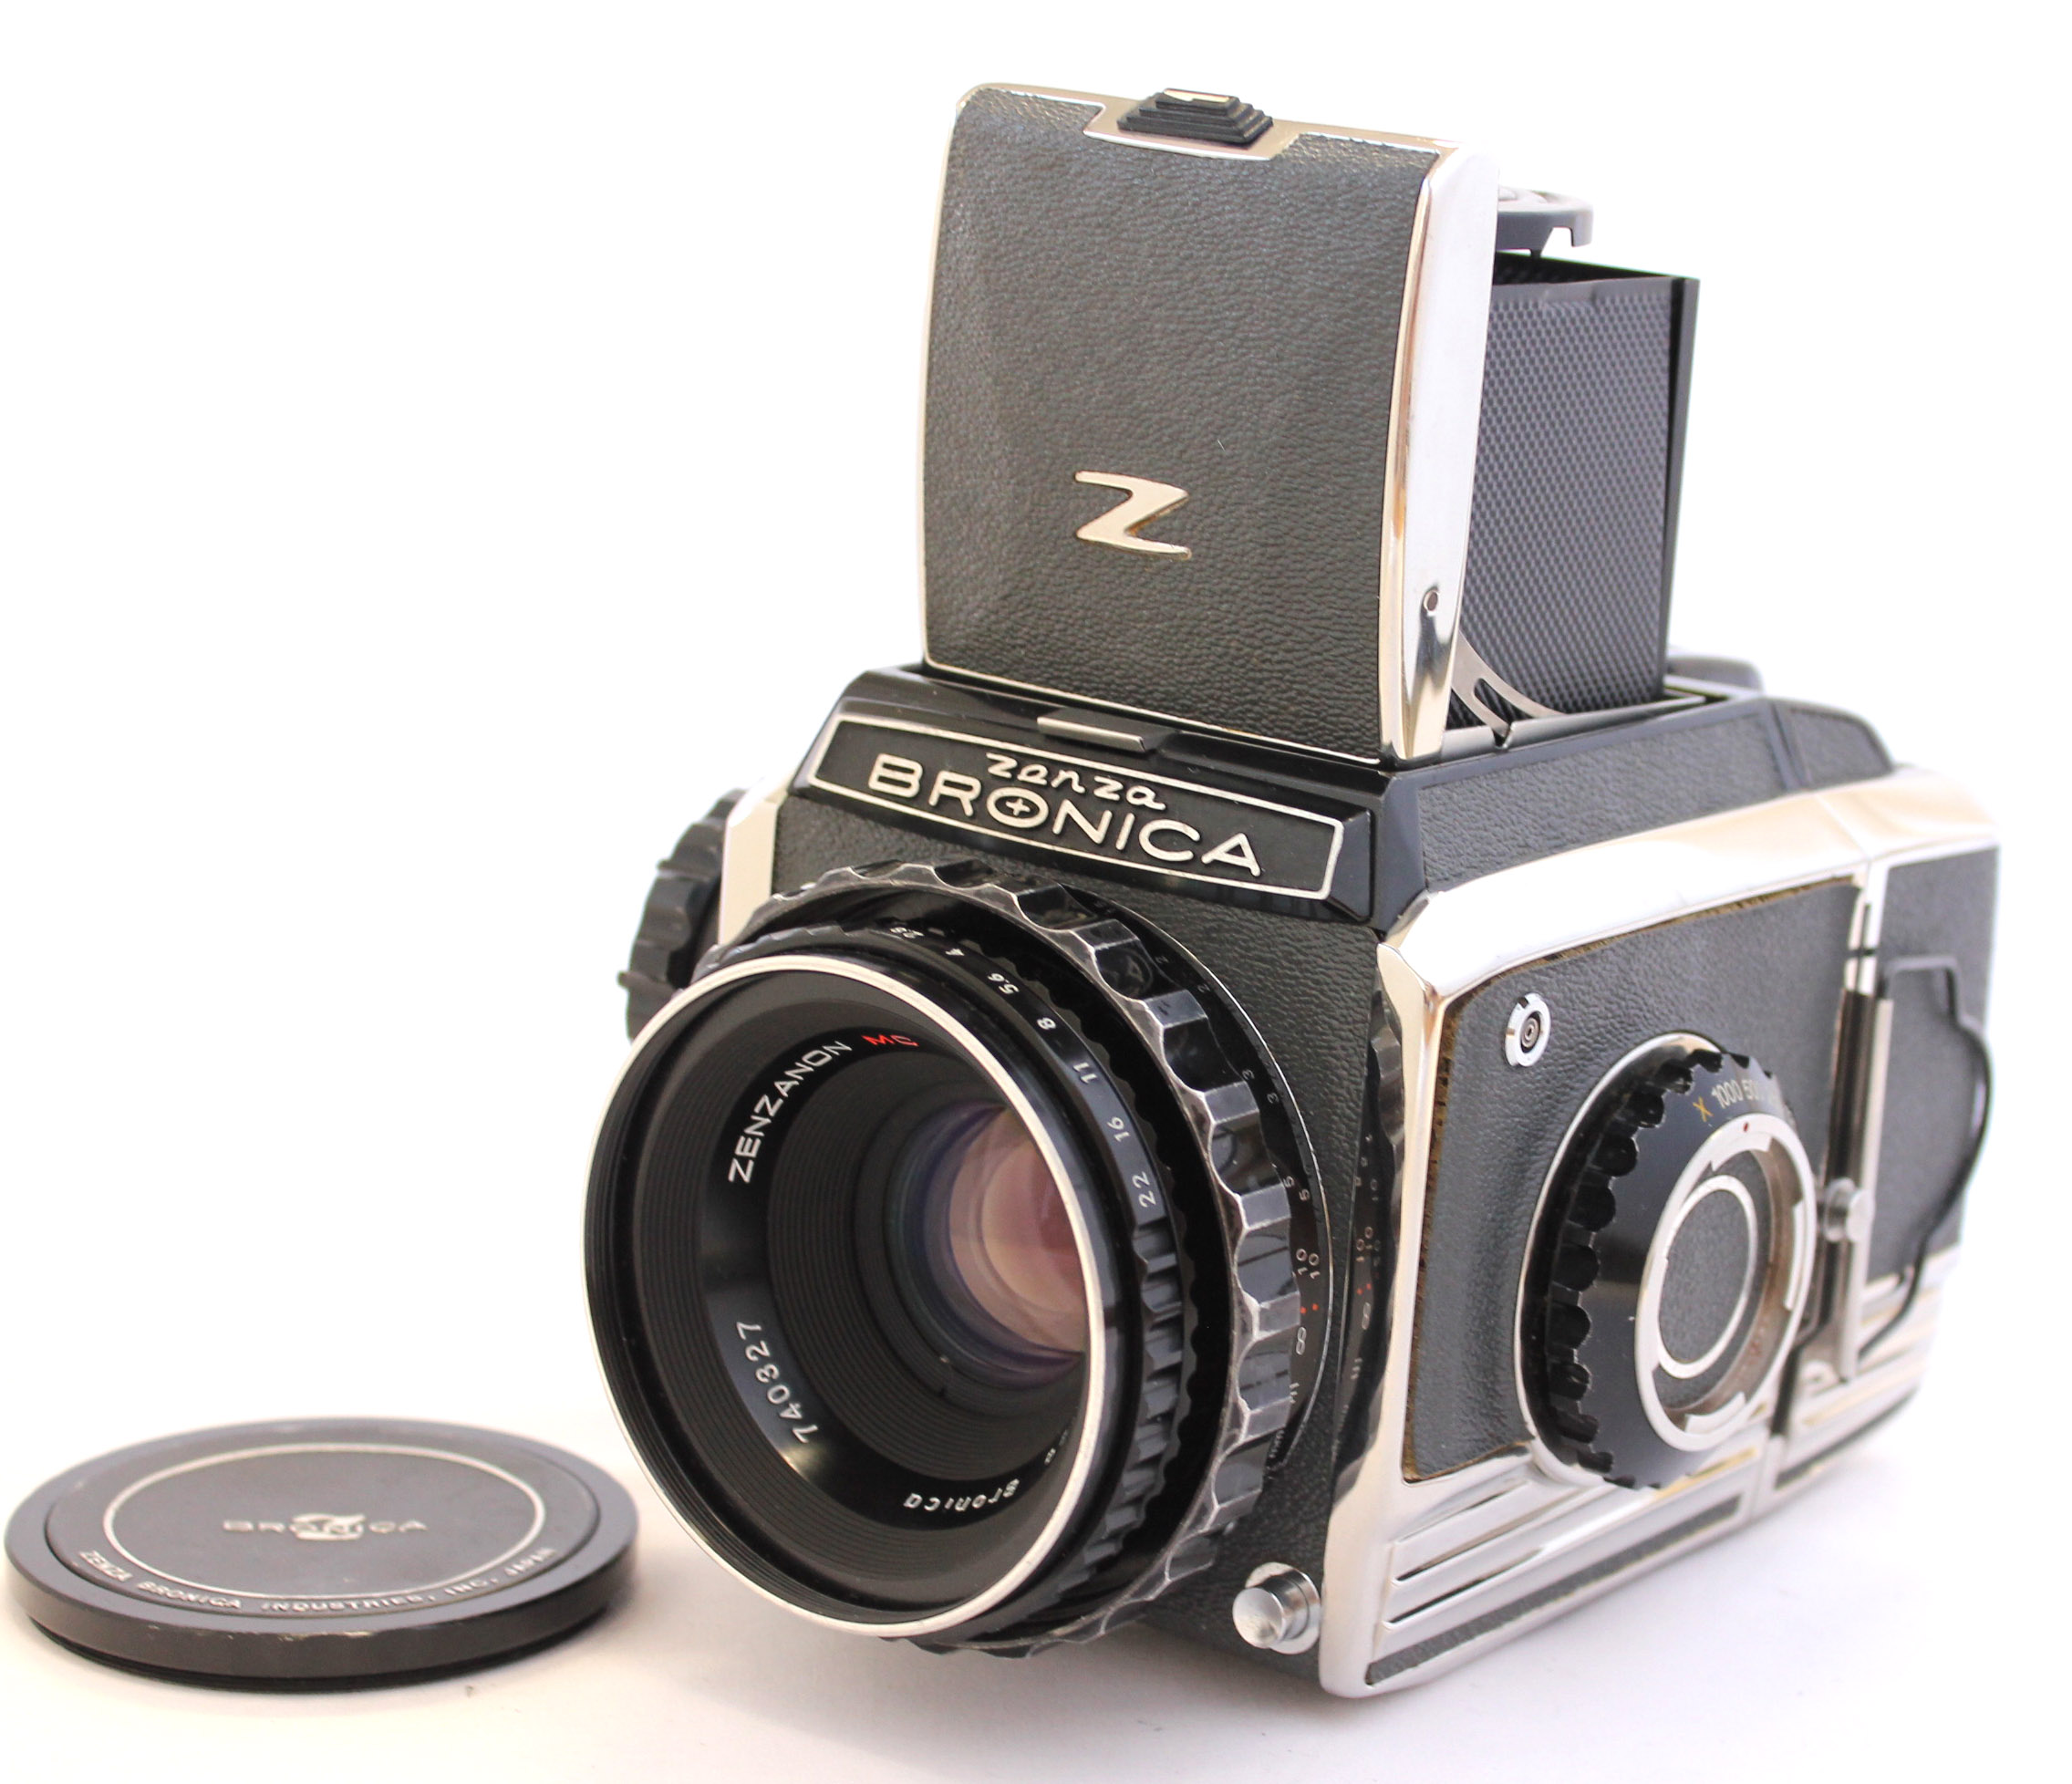 Zenza Bronica S2A Final Model (S/N CB156*) w/ Zenzanon MC 75mm F/2.8 and 6x6 Film Back from Japan